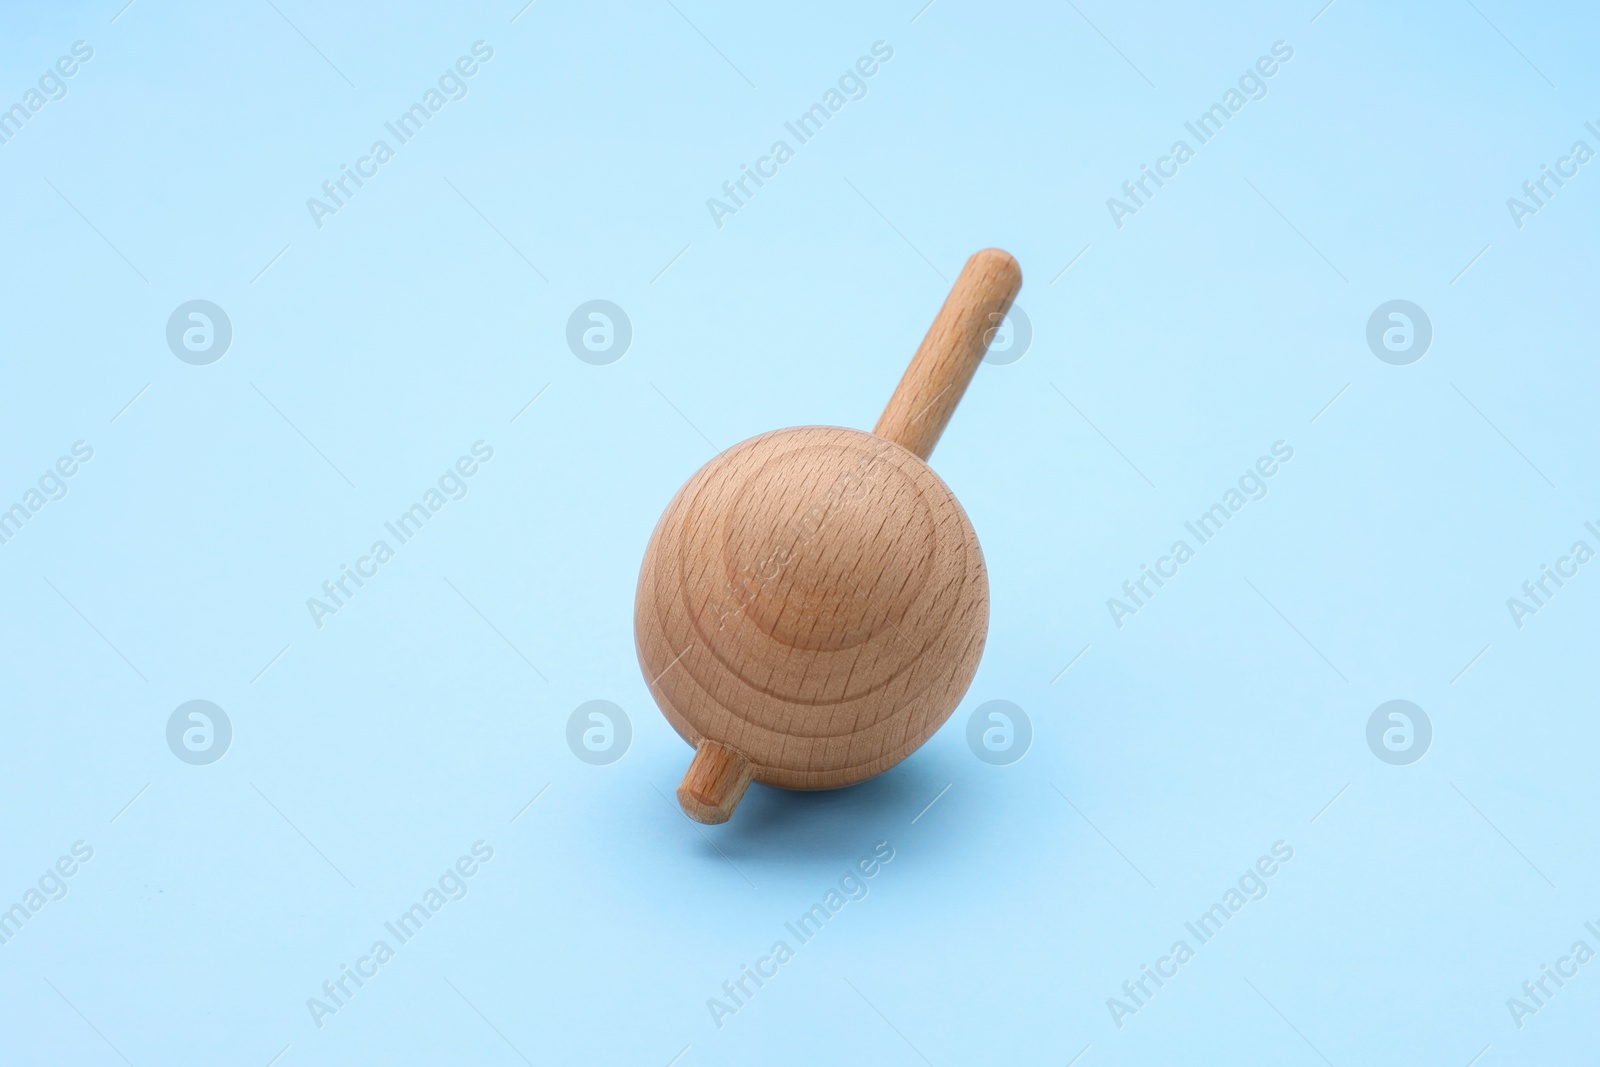 Photo of One wooden spinning top on light blue background. Toy whirligig